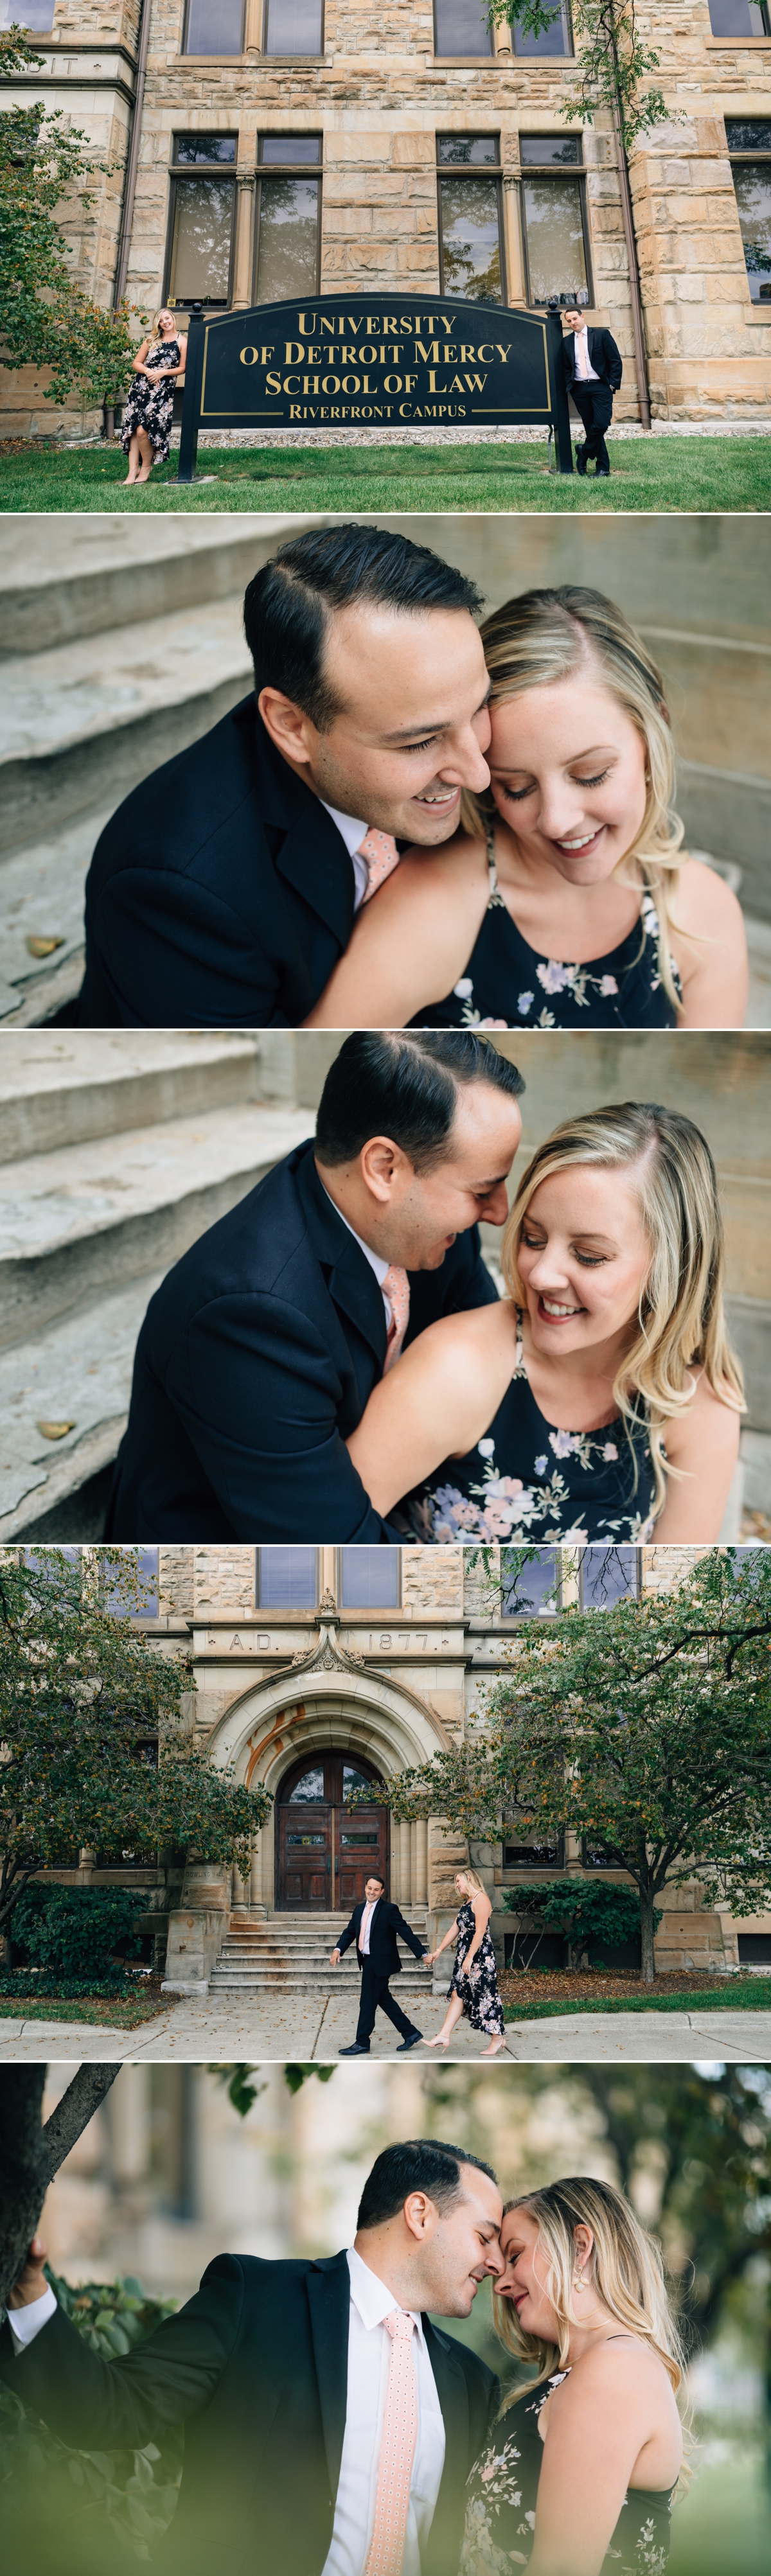 Guy and girl cuddling and holding hands at the University of Detroit Mercy for their engagement session